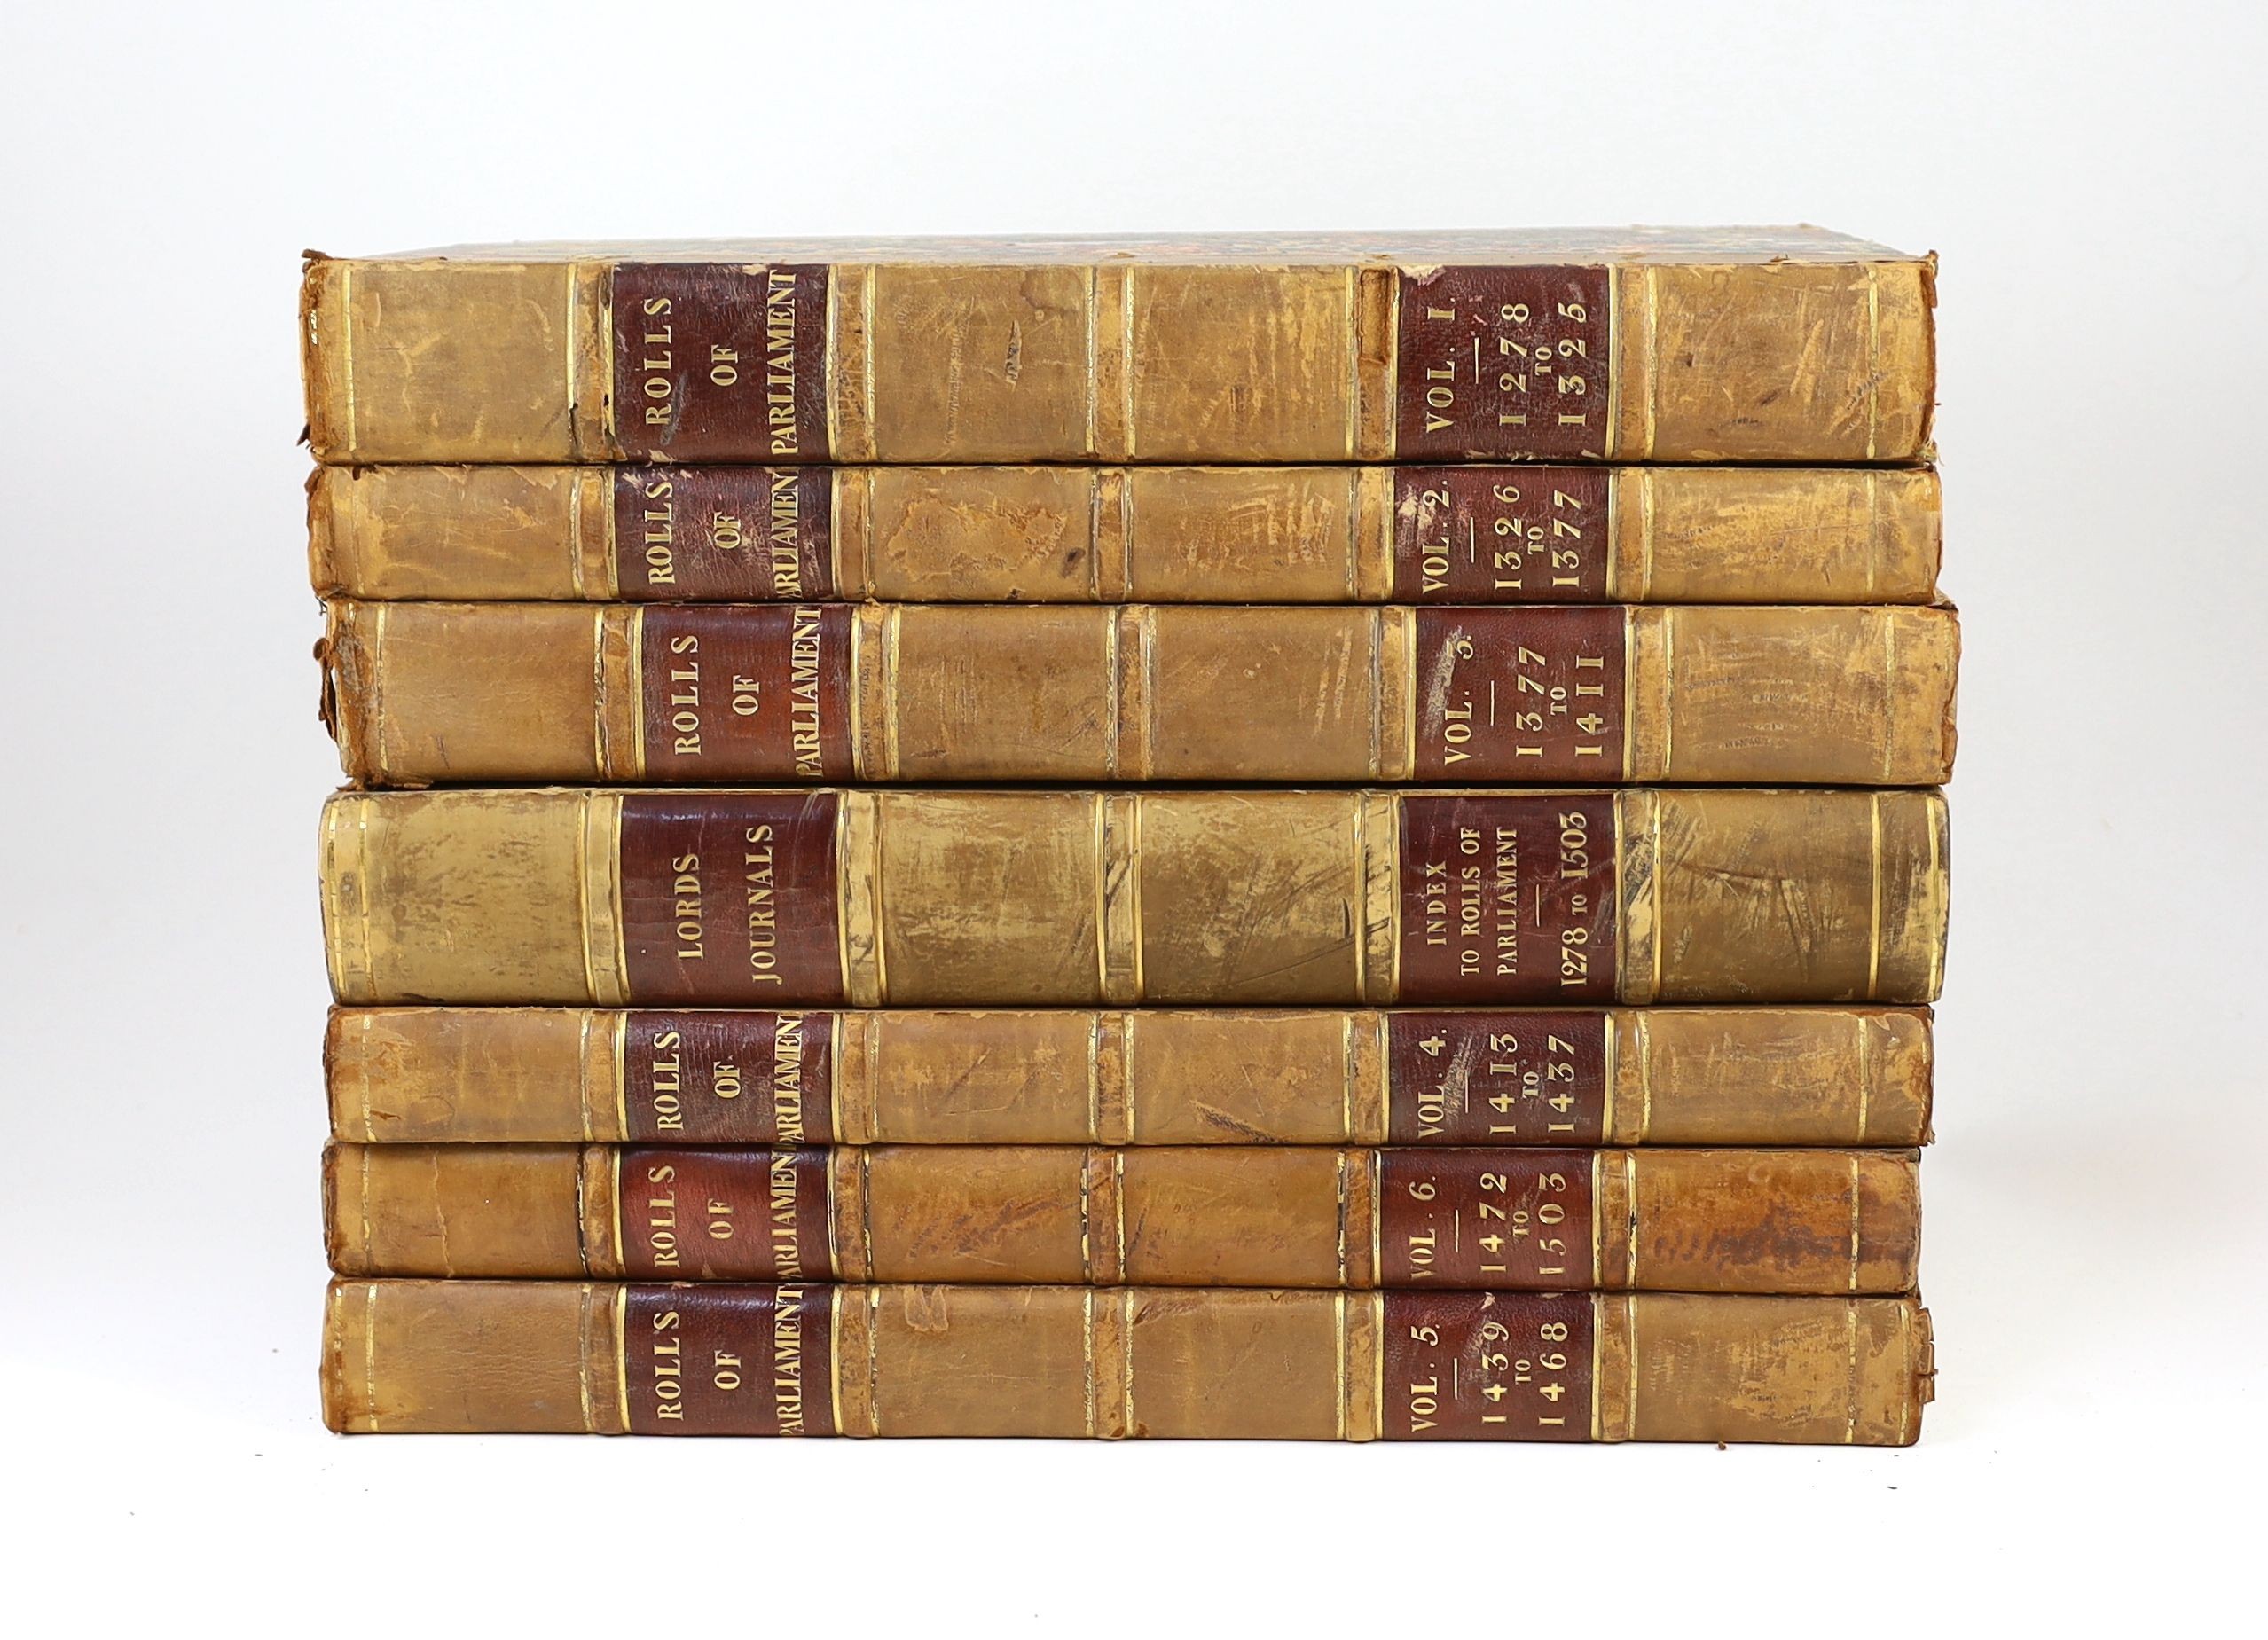 (Rolls Series) Rotuli Parliamentorum; ut et Petitiones et Placita Parliamentorum....7 vols. (incl. Index). vol 4 with 4 engraved plates of seals; old half calf and marbled boards, gilt ruled panelled spines with maroon l